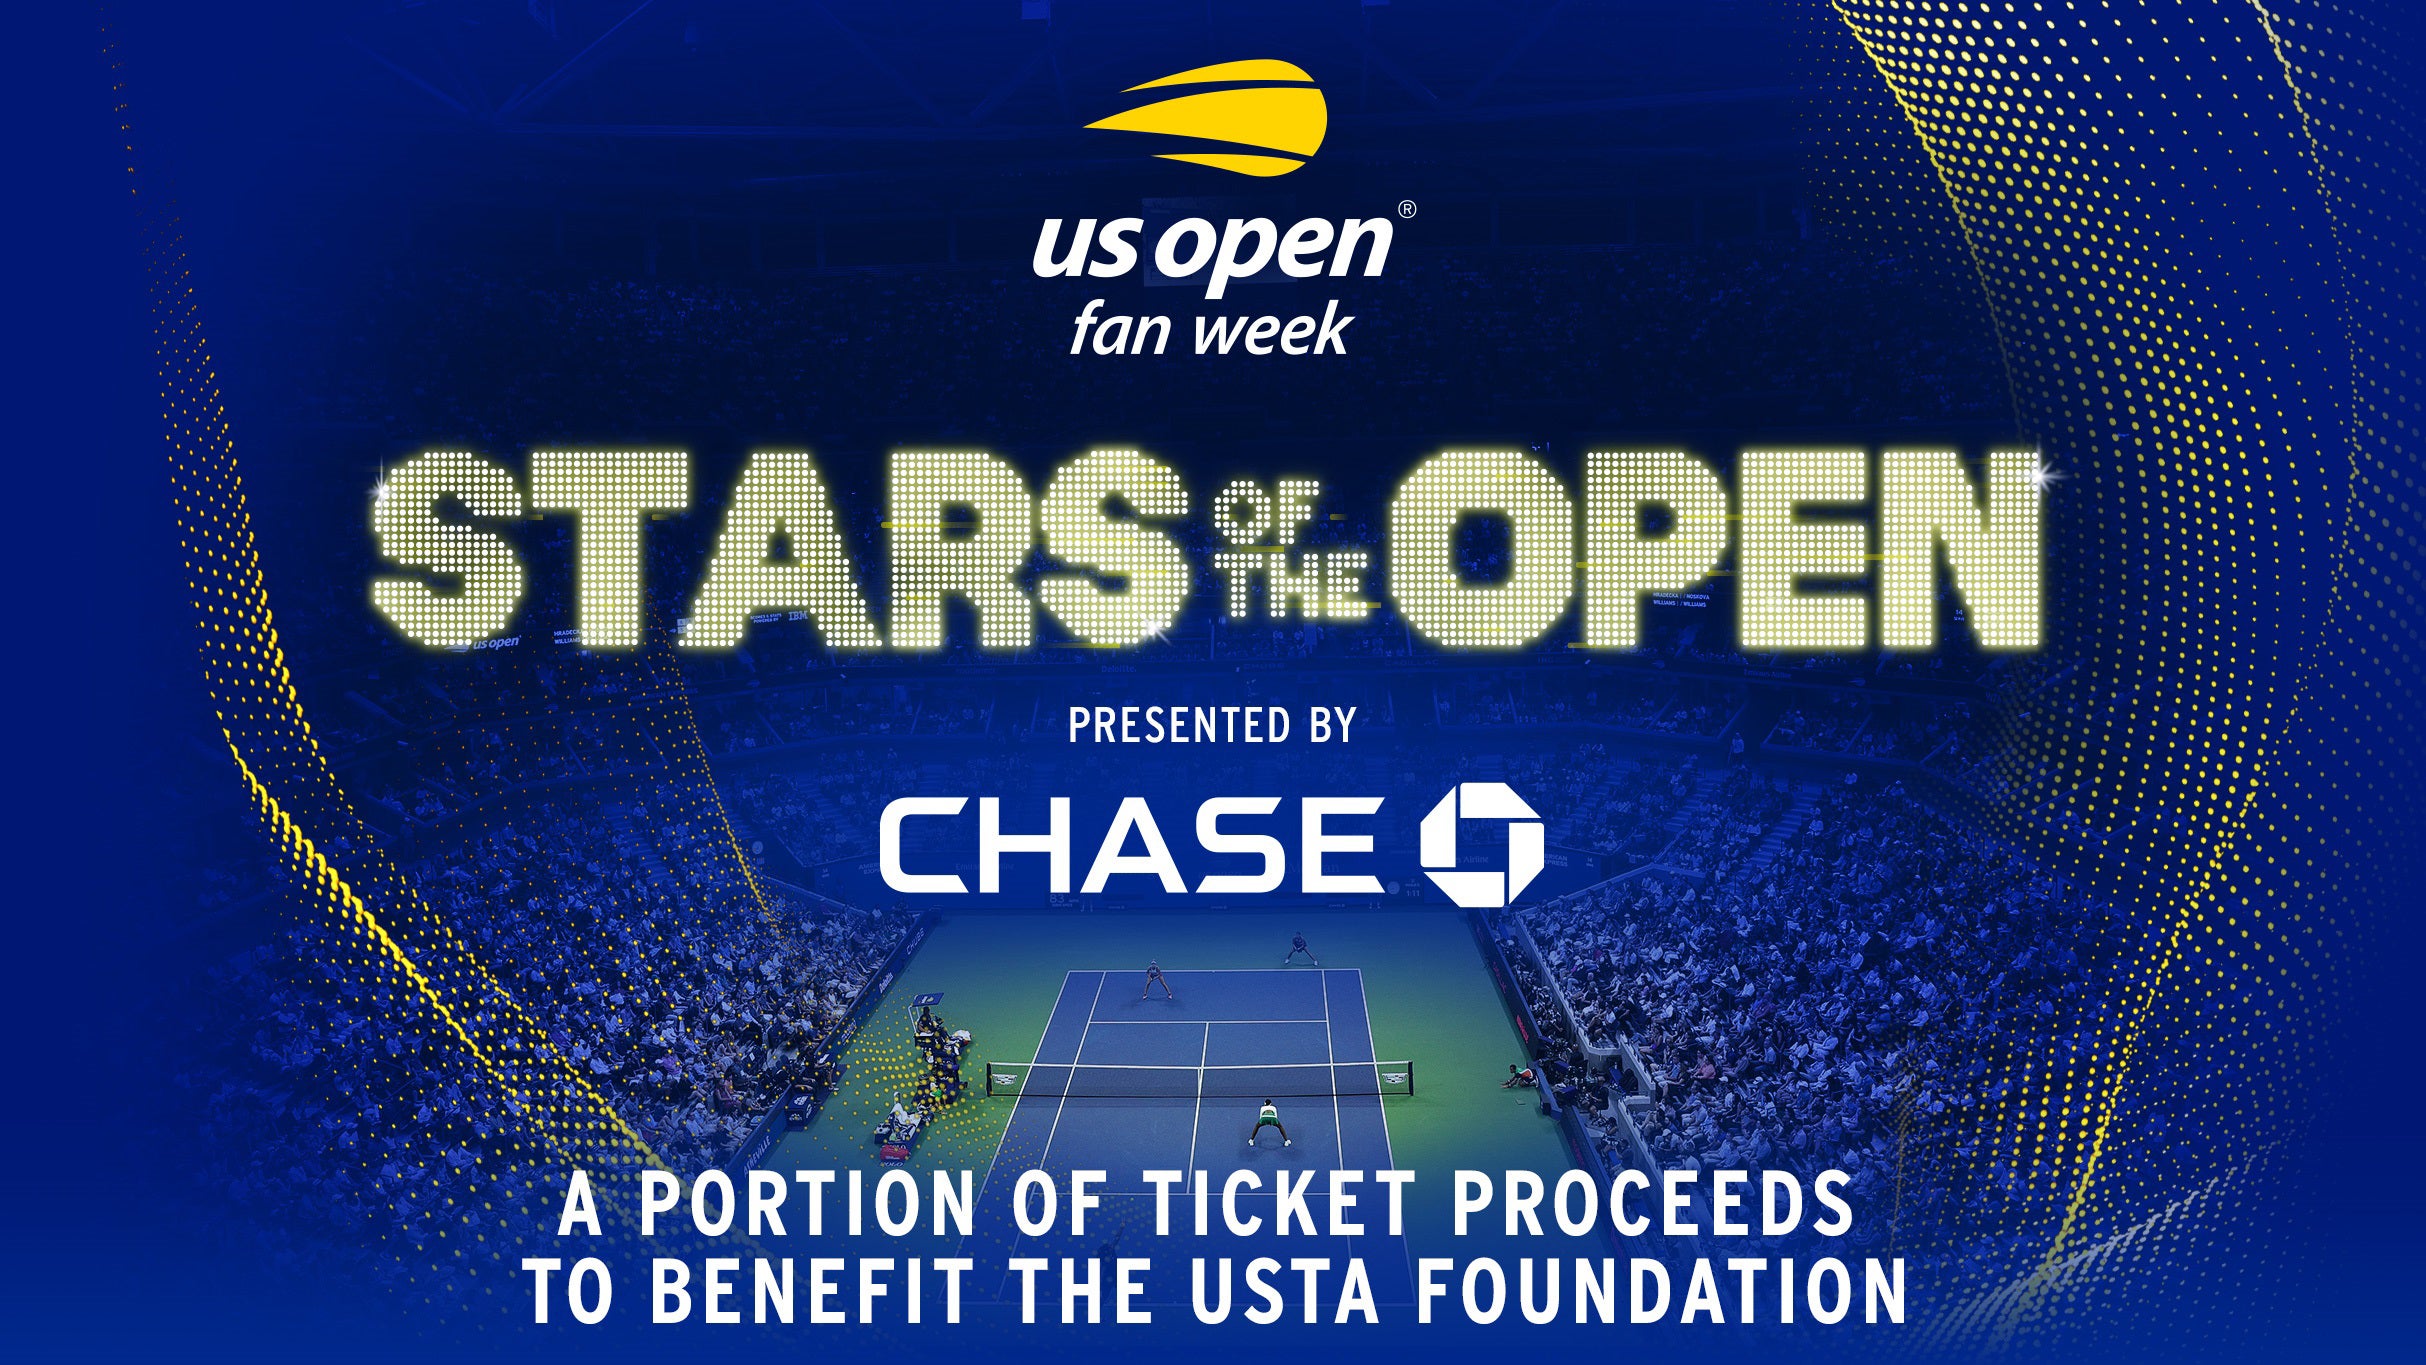 Stars of the Open presented by Chase